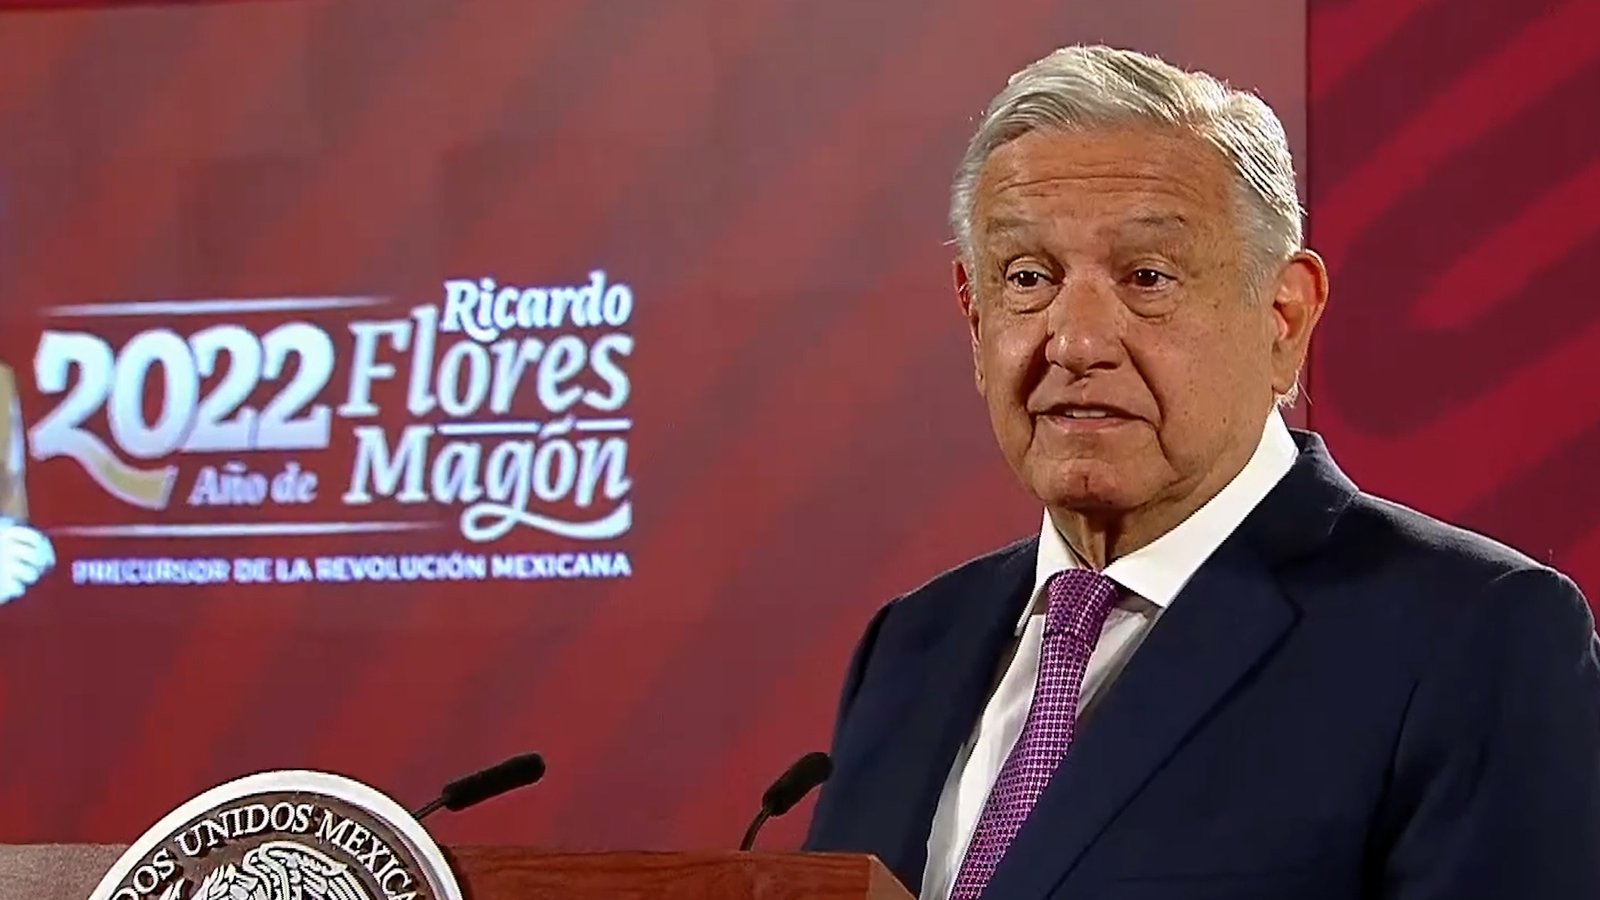 Mexico’s President AMLO demands freedom for Julian Assange, ‘prisoner of conscience’ and ‘best journalist of our time’